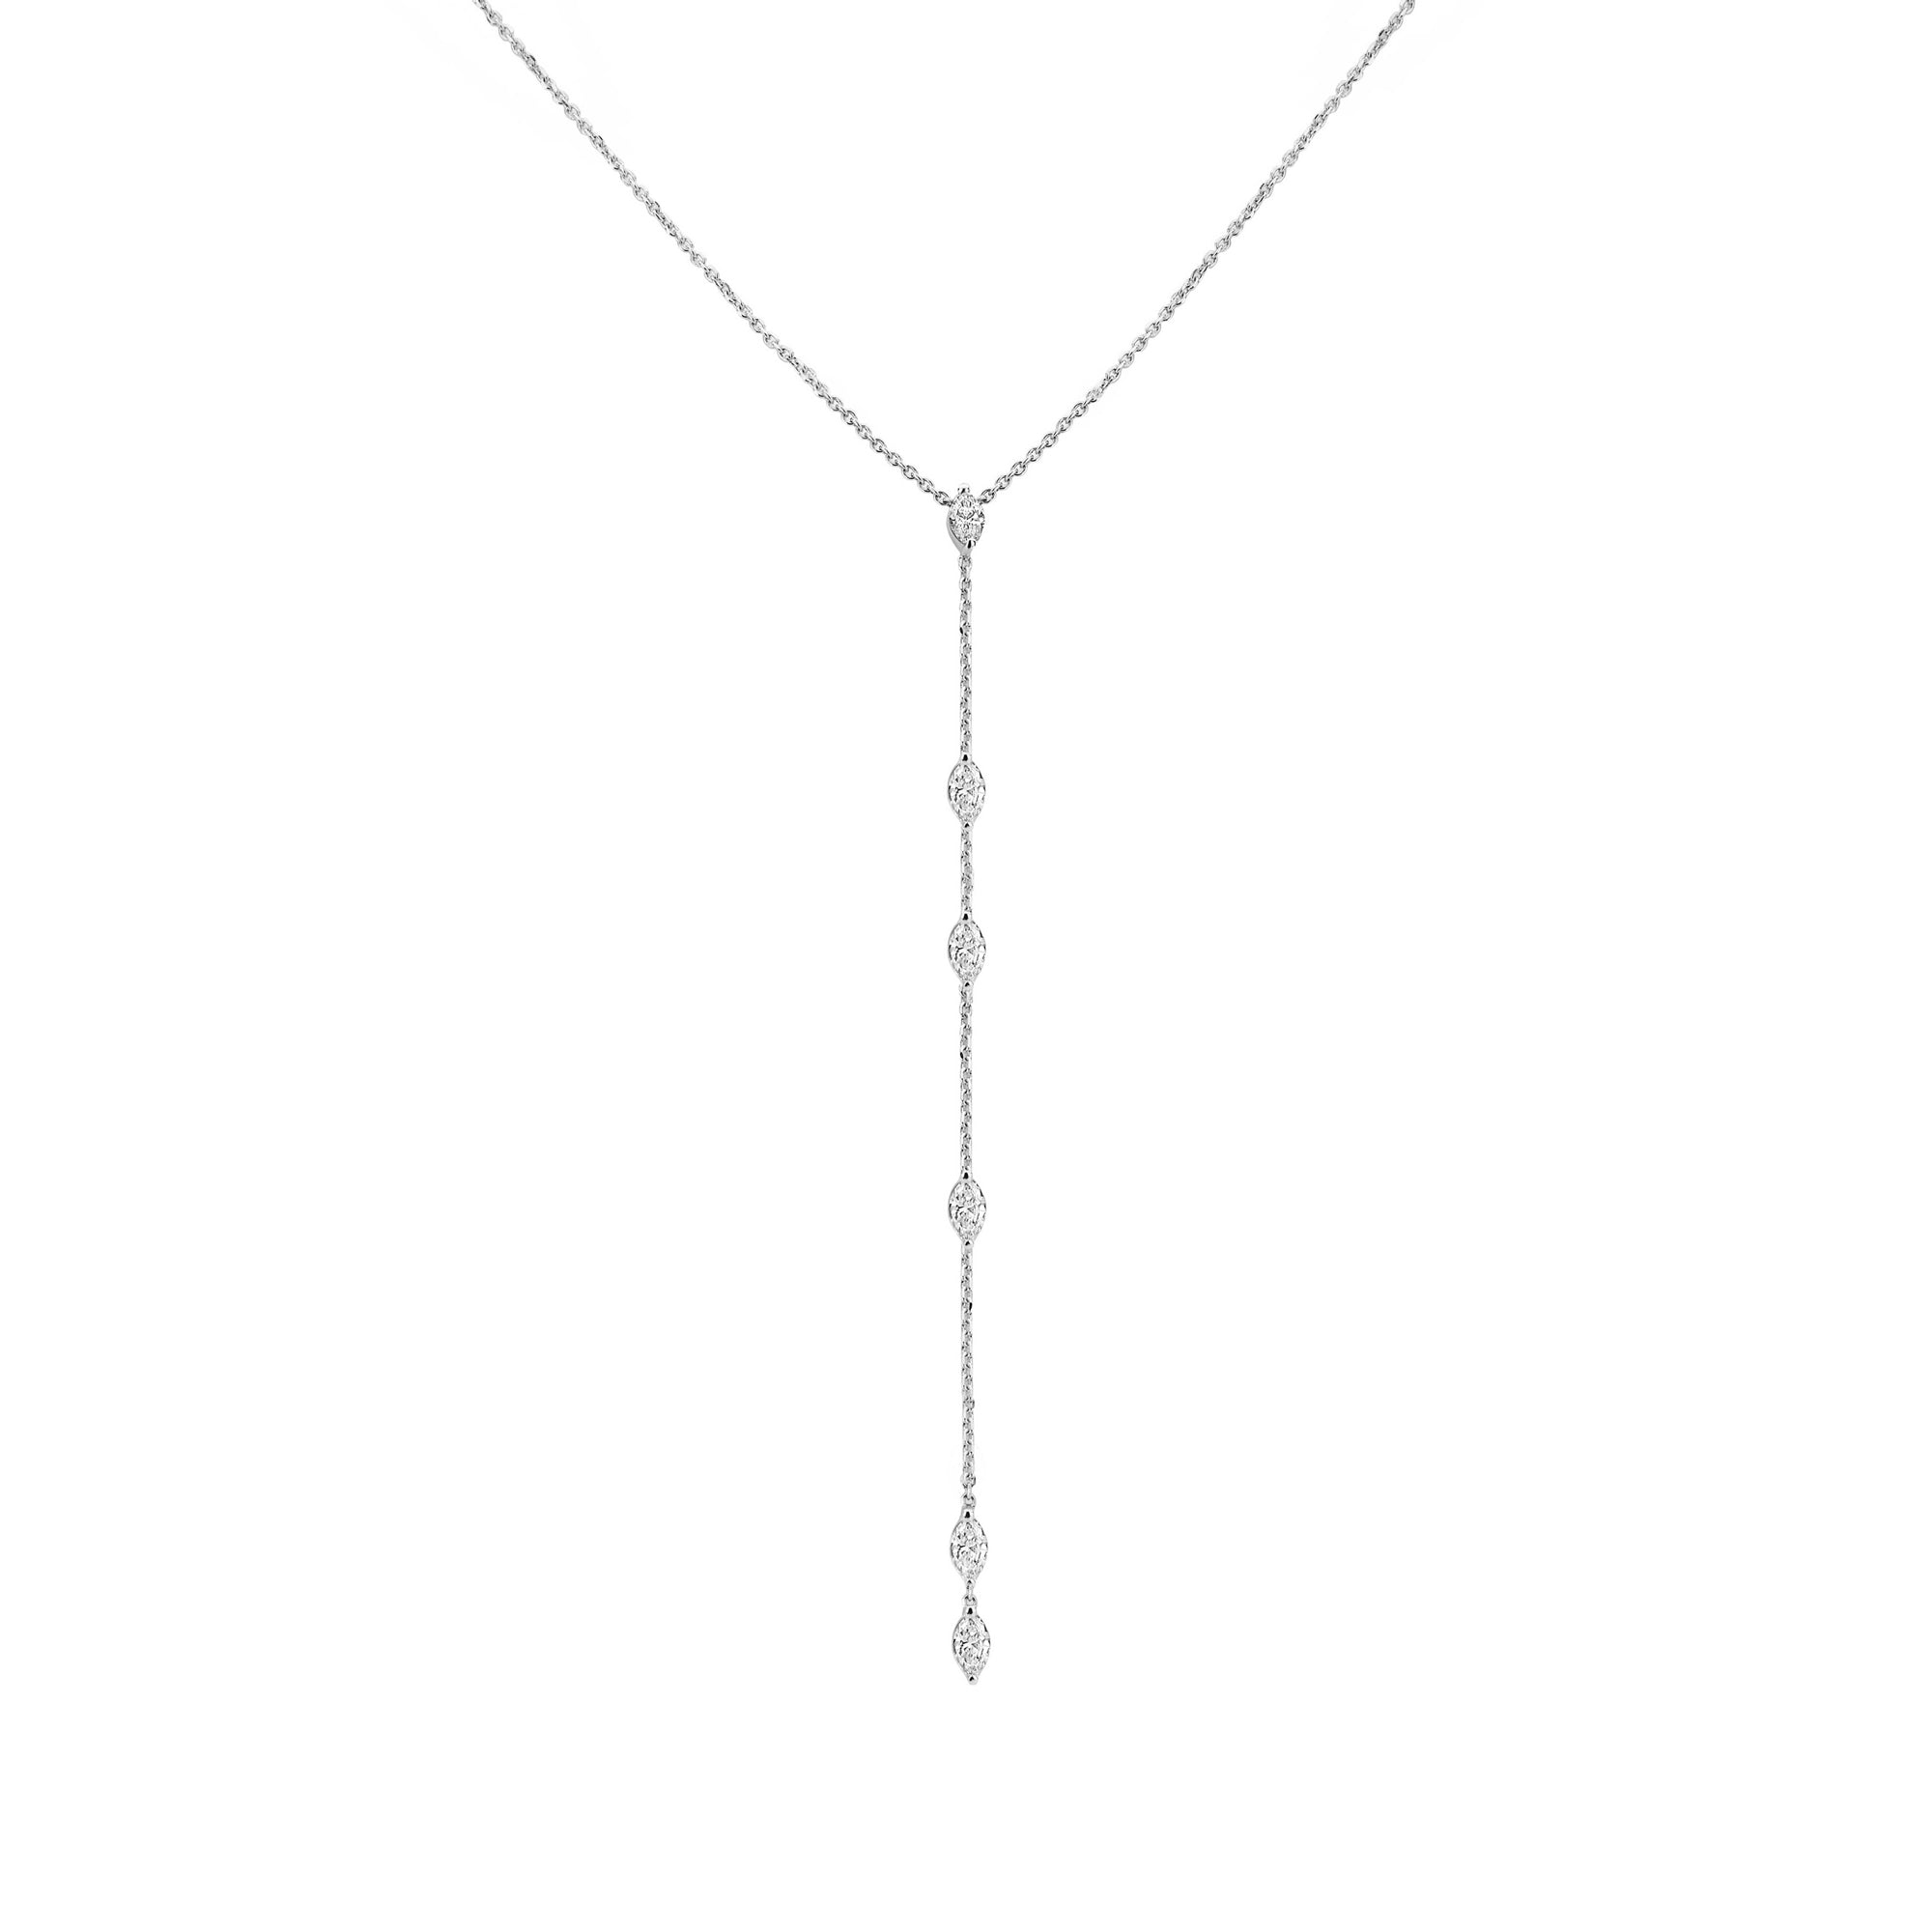 White Gold Cascade Necklace: Luxury Lab Grown Diamond Drop Necklace by ...